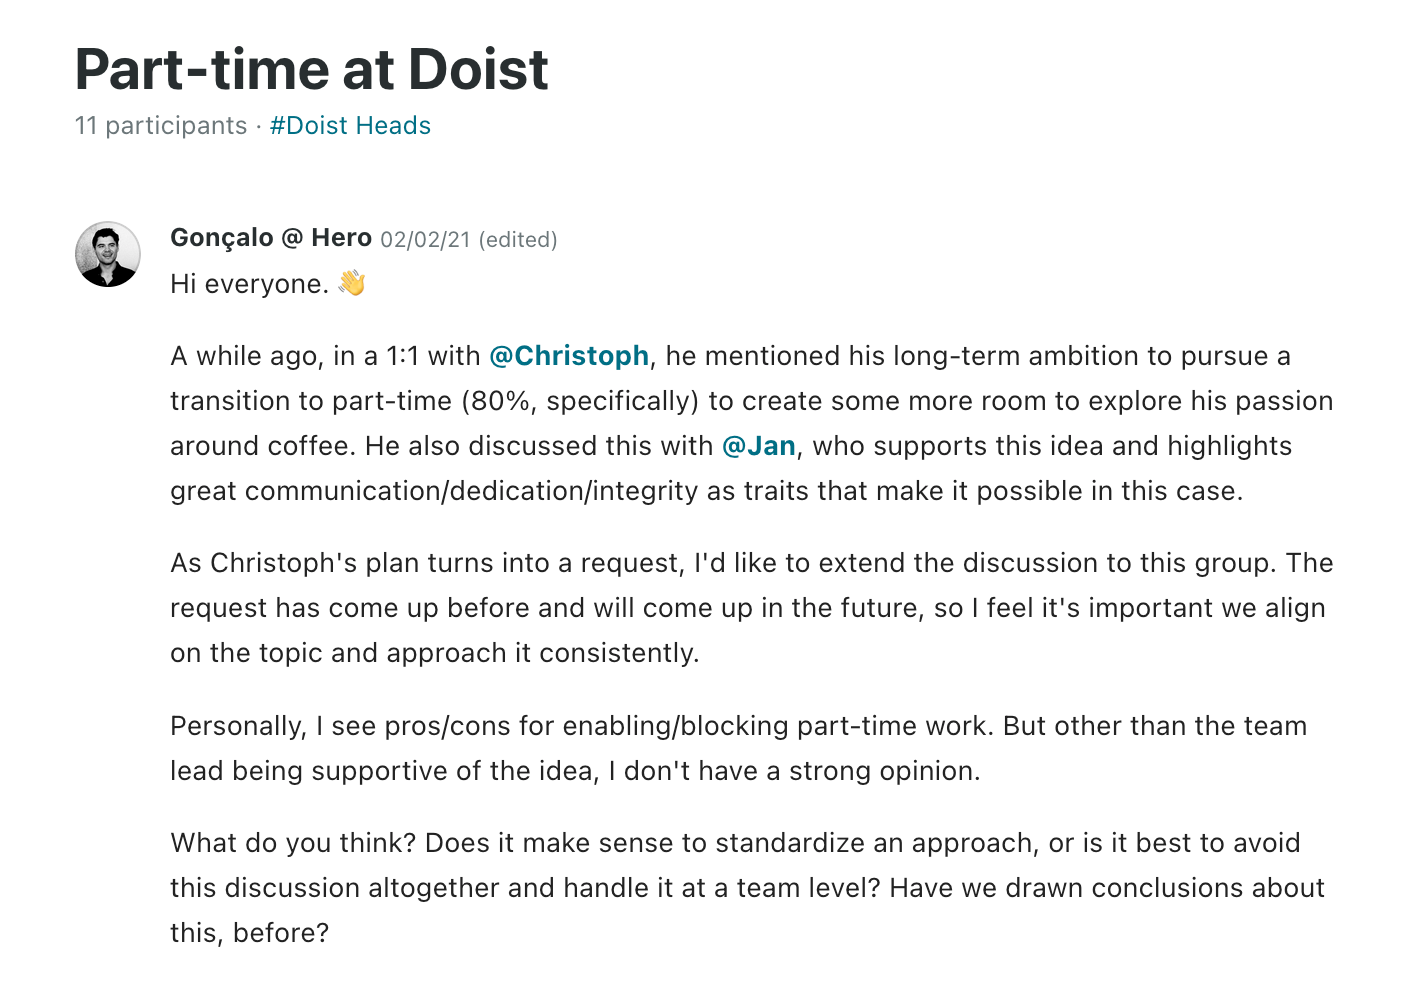 A Twist thread title "Part-time at Doist" in the #Doist Heads channel. Gonçalo opens up a discussion about whether the company should permit part-time work based on a request by Christoph.